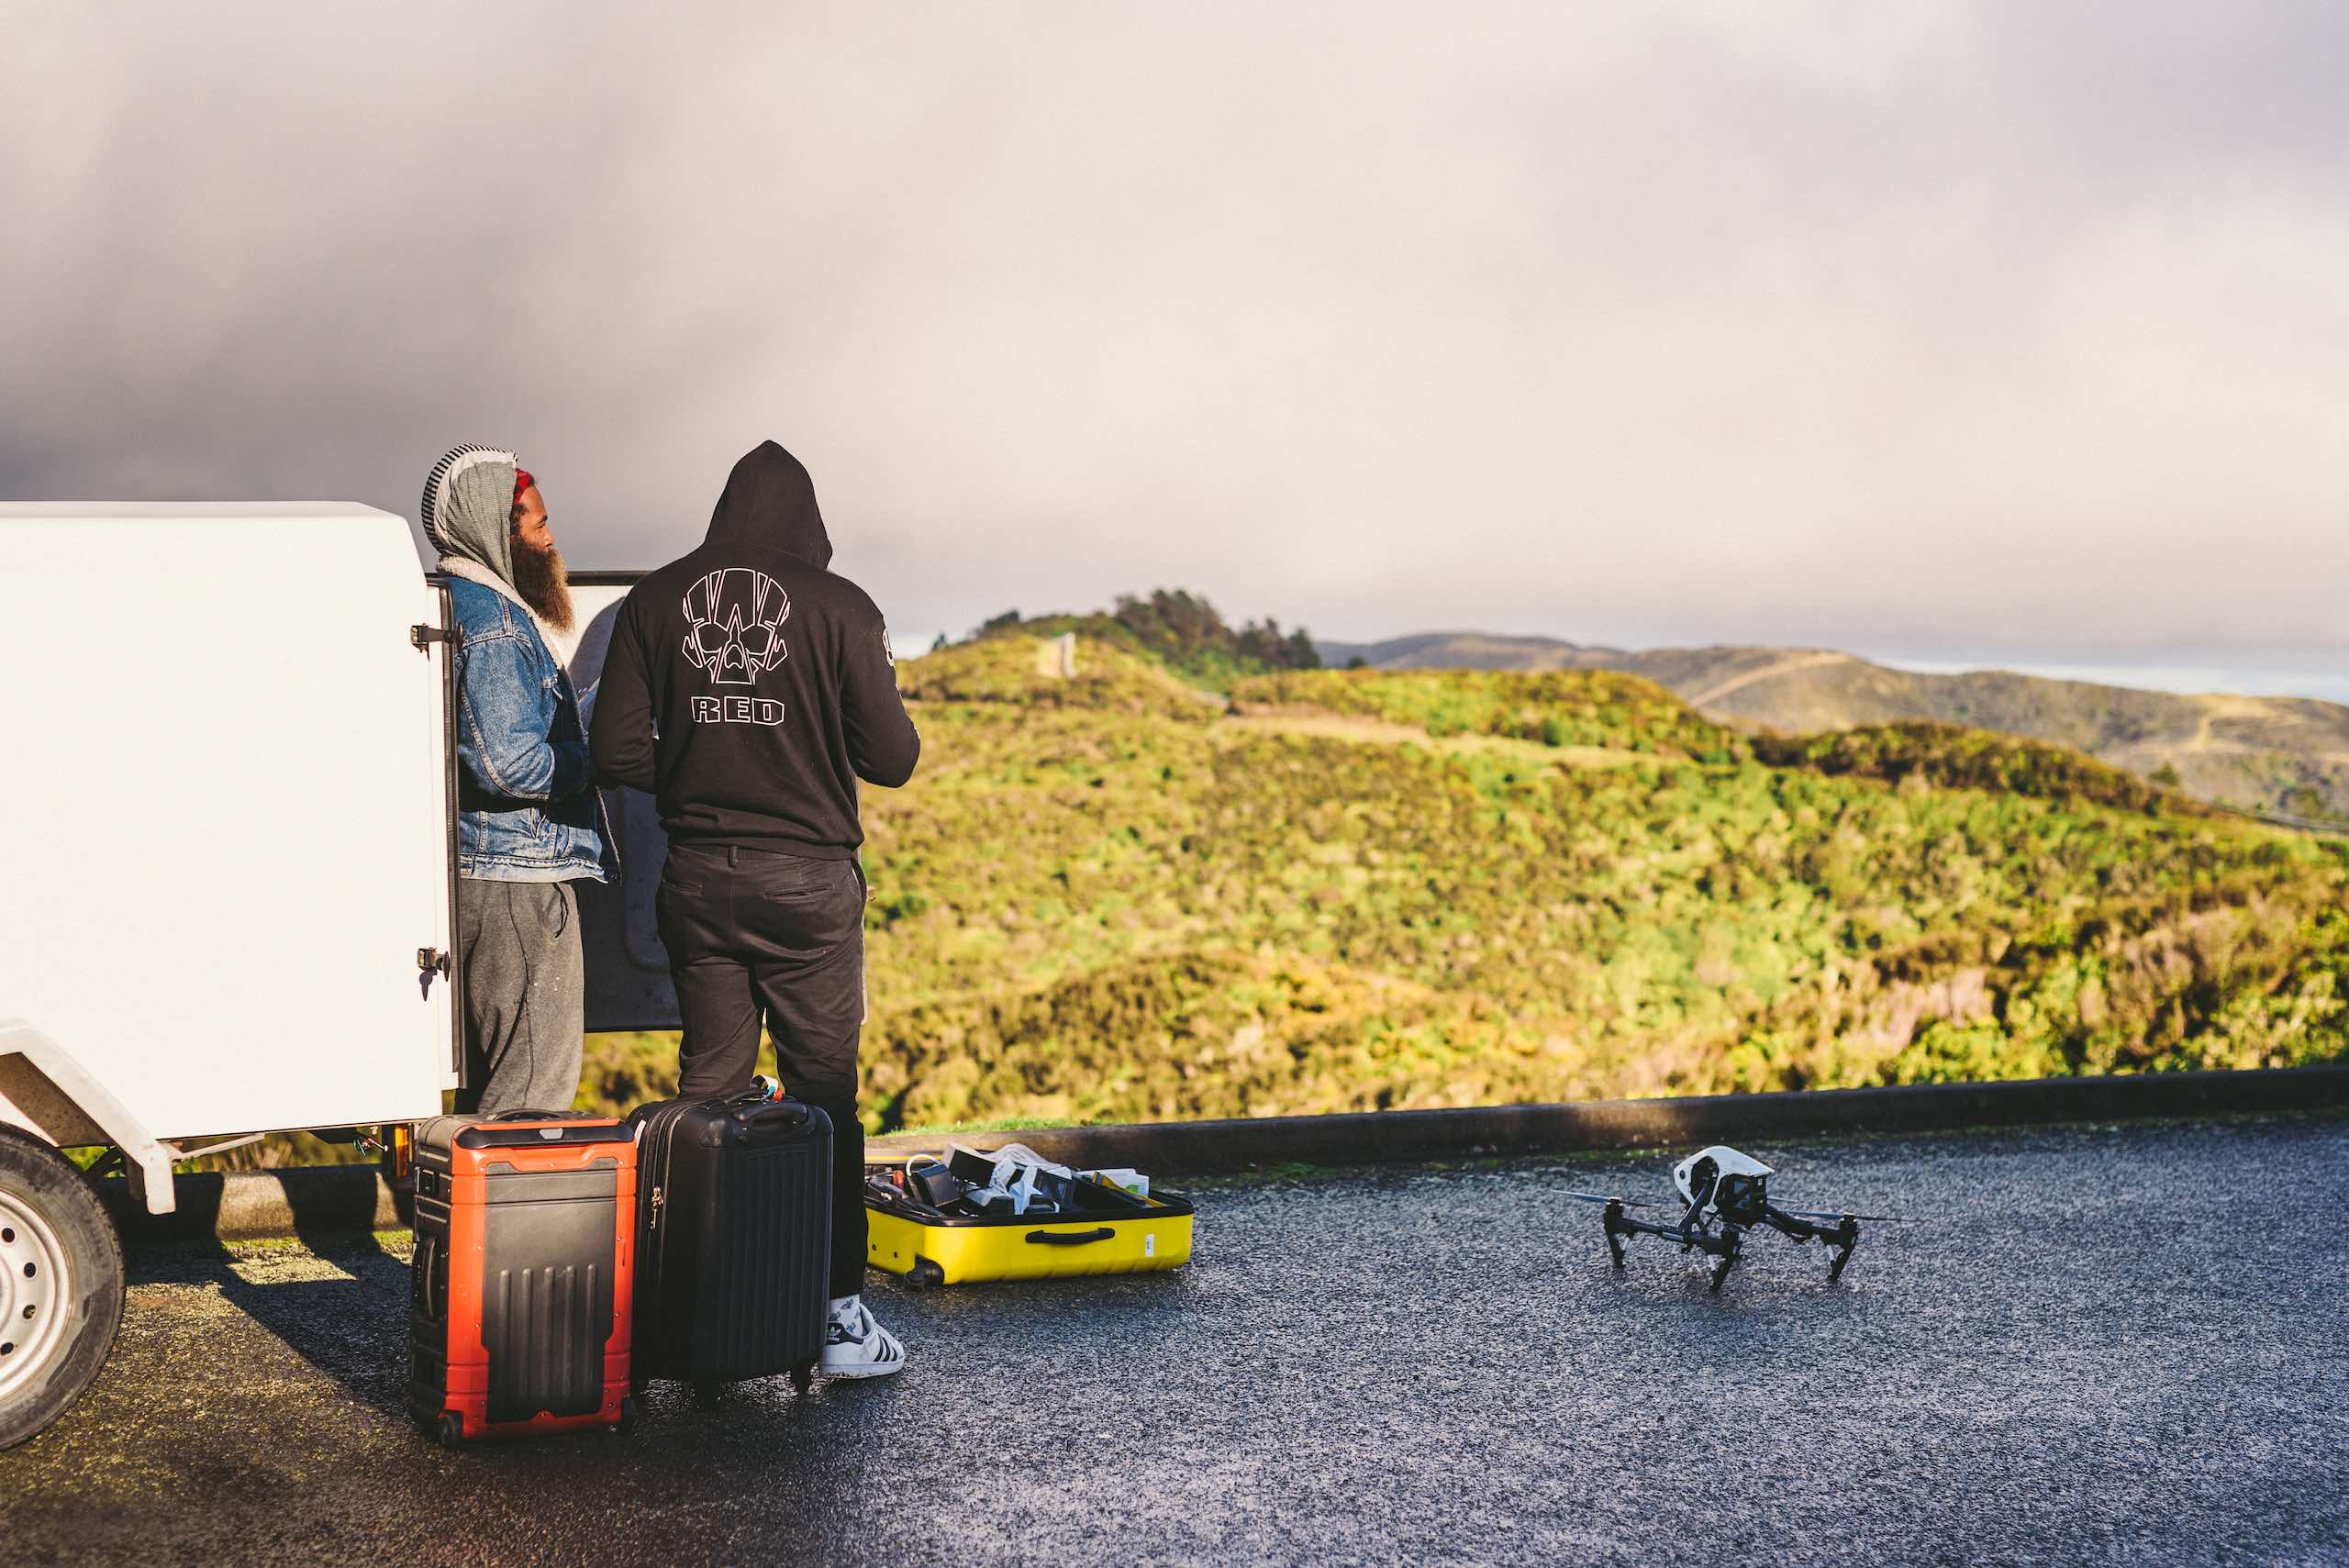 Drone Video and Drone Footage - Video and Film Production Services in New York City Two crew members by a white fan looking out over a valley with drone and equipment around them